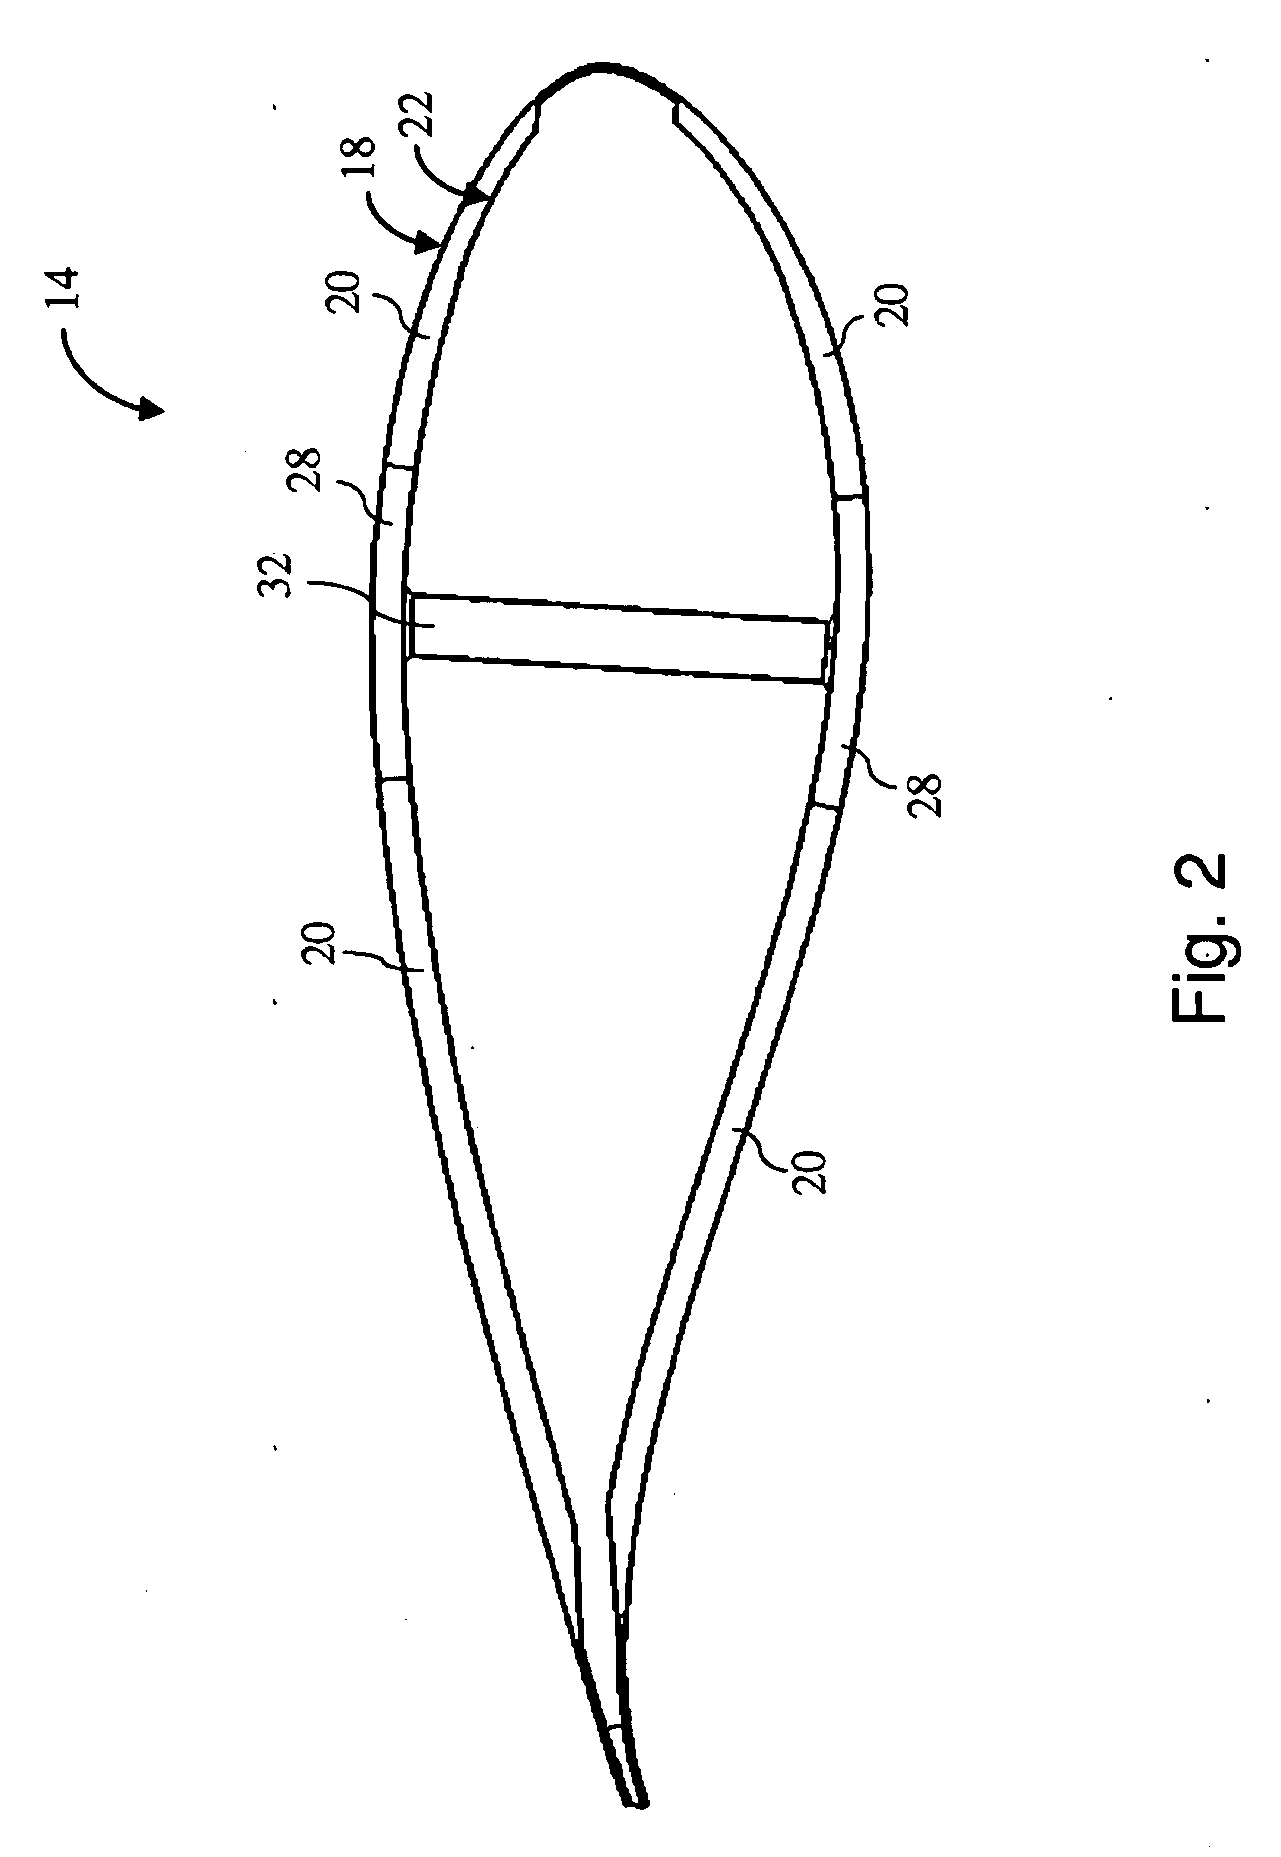 Method for assembling jointed wind turbine blade